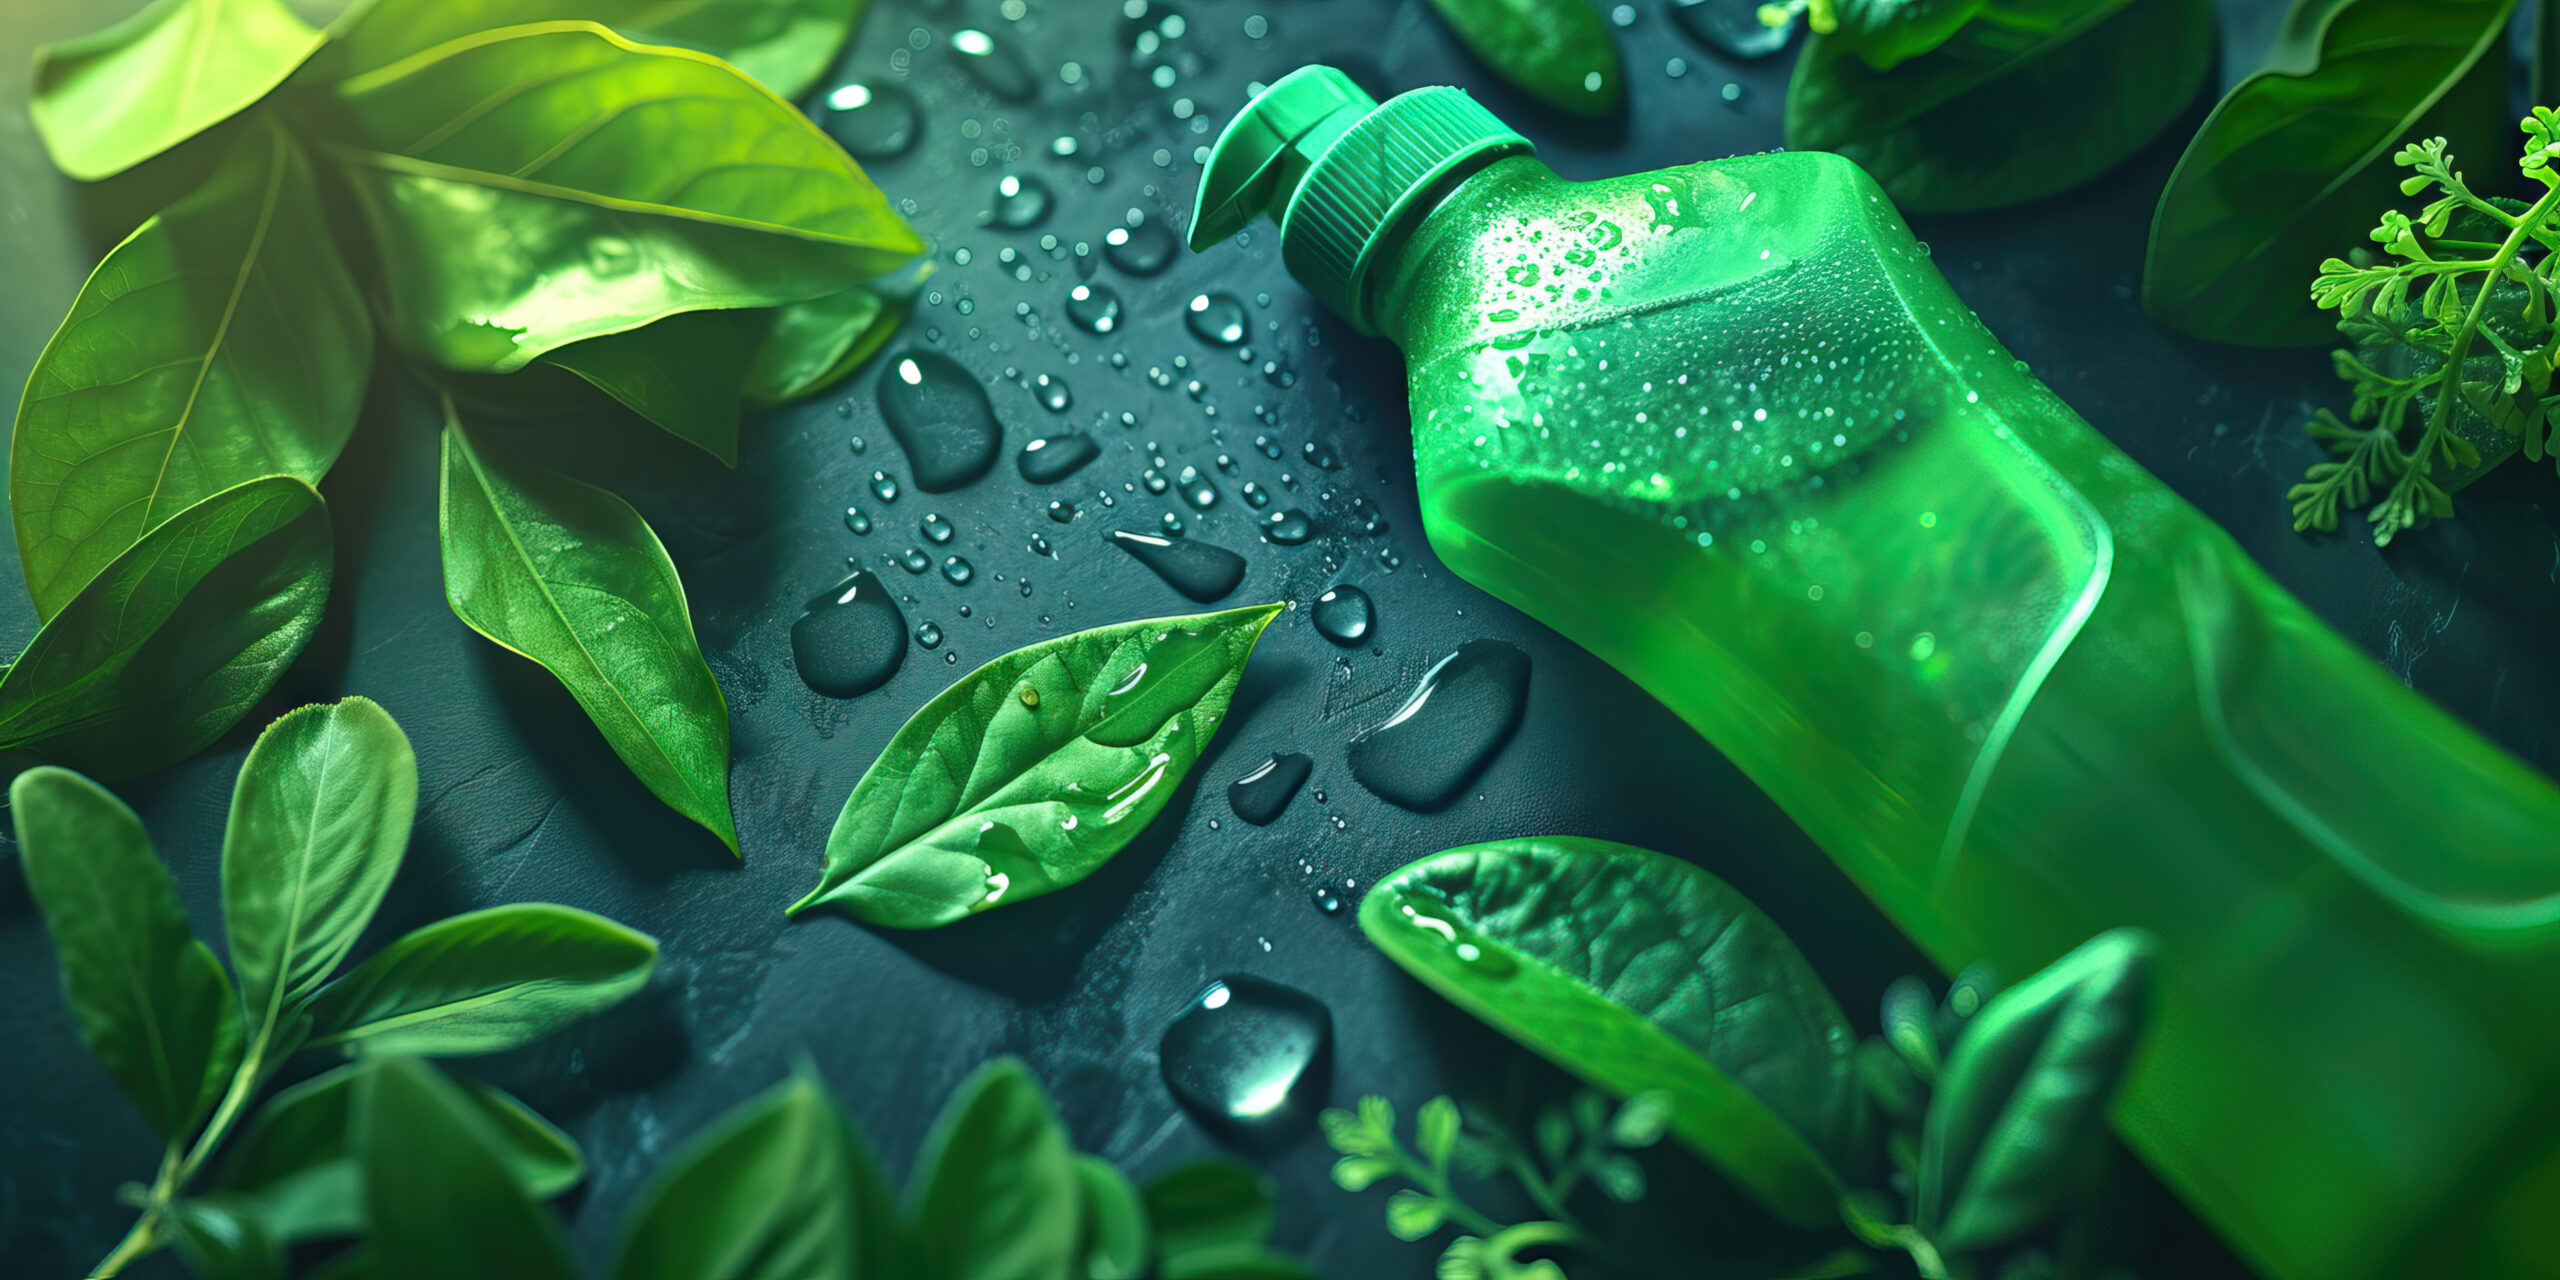 Green Cleaning: Close-up of Eco-Friendly Cleaning Products and Methods, Promoting Sustainable Household Practices